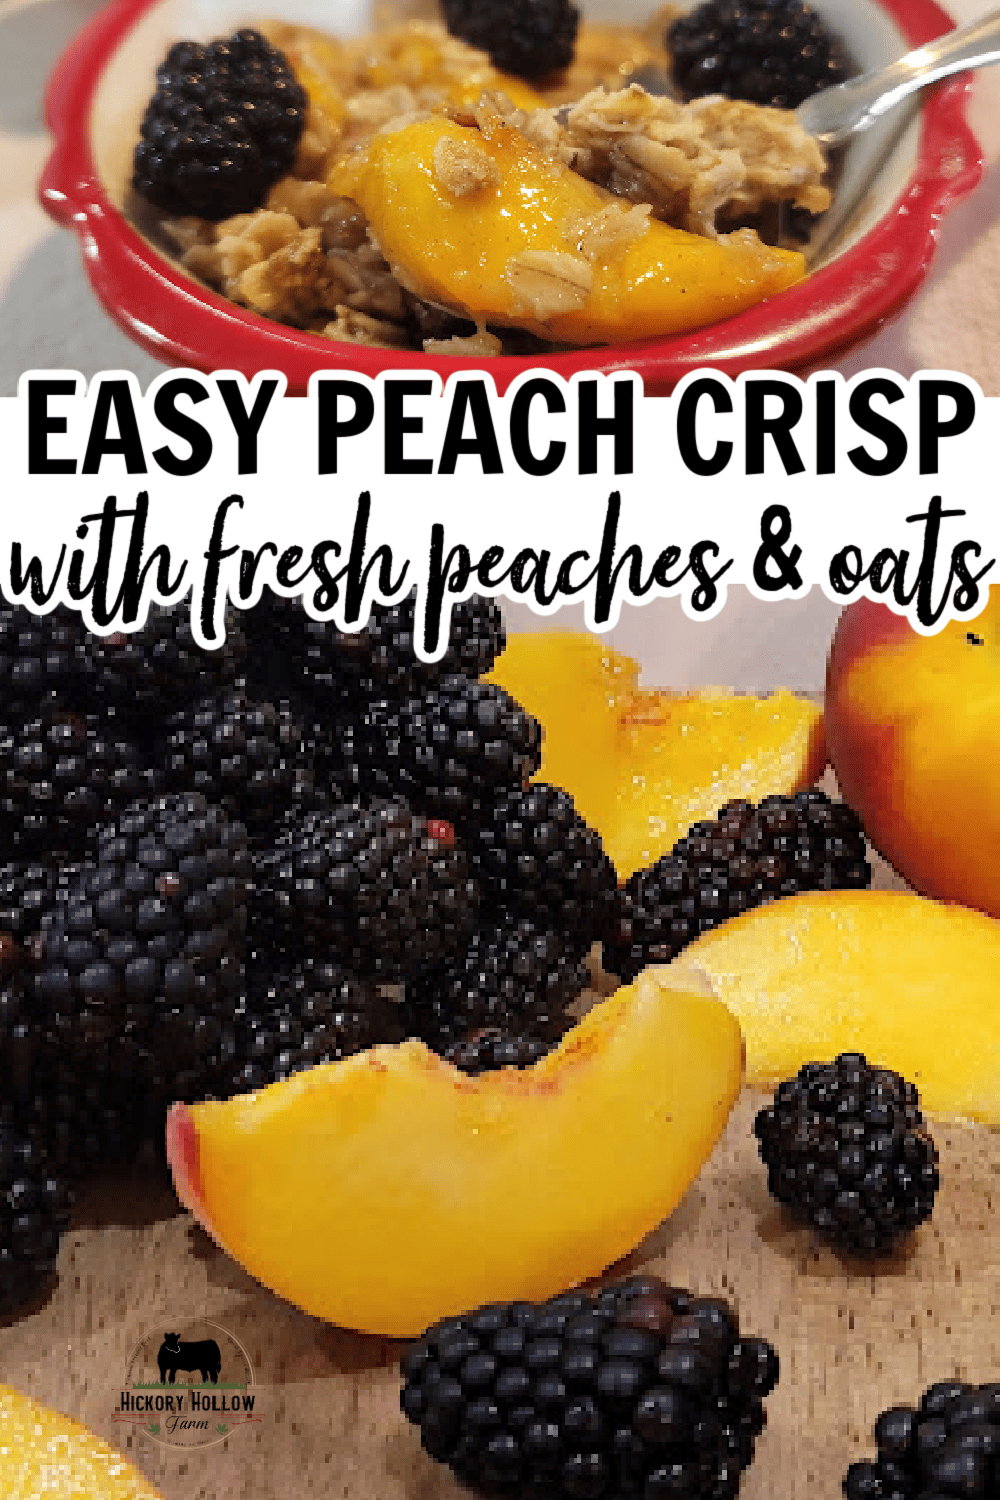 Easy summer dessert that everyone will love! This easy peach crisp with fresh peaches comes together quickly. Add blackberries or blueberries for a winning combination. Oat, brown sugar, and butter topping cooks up nice and crisp!